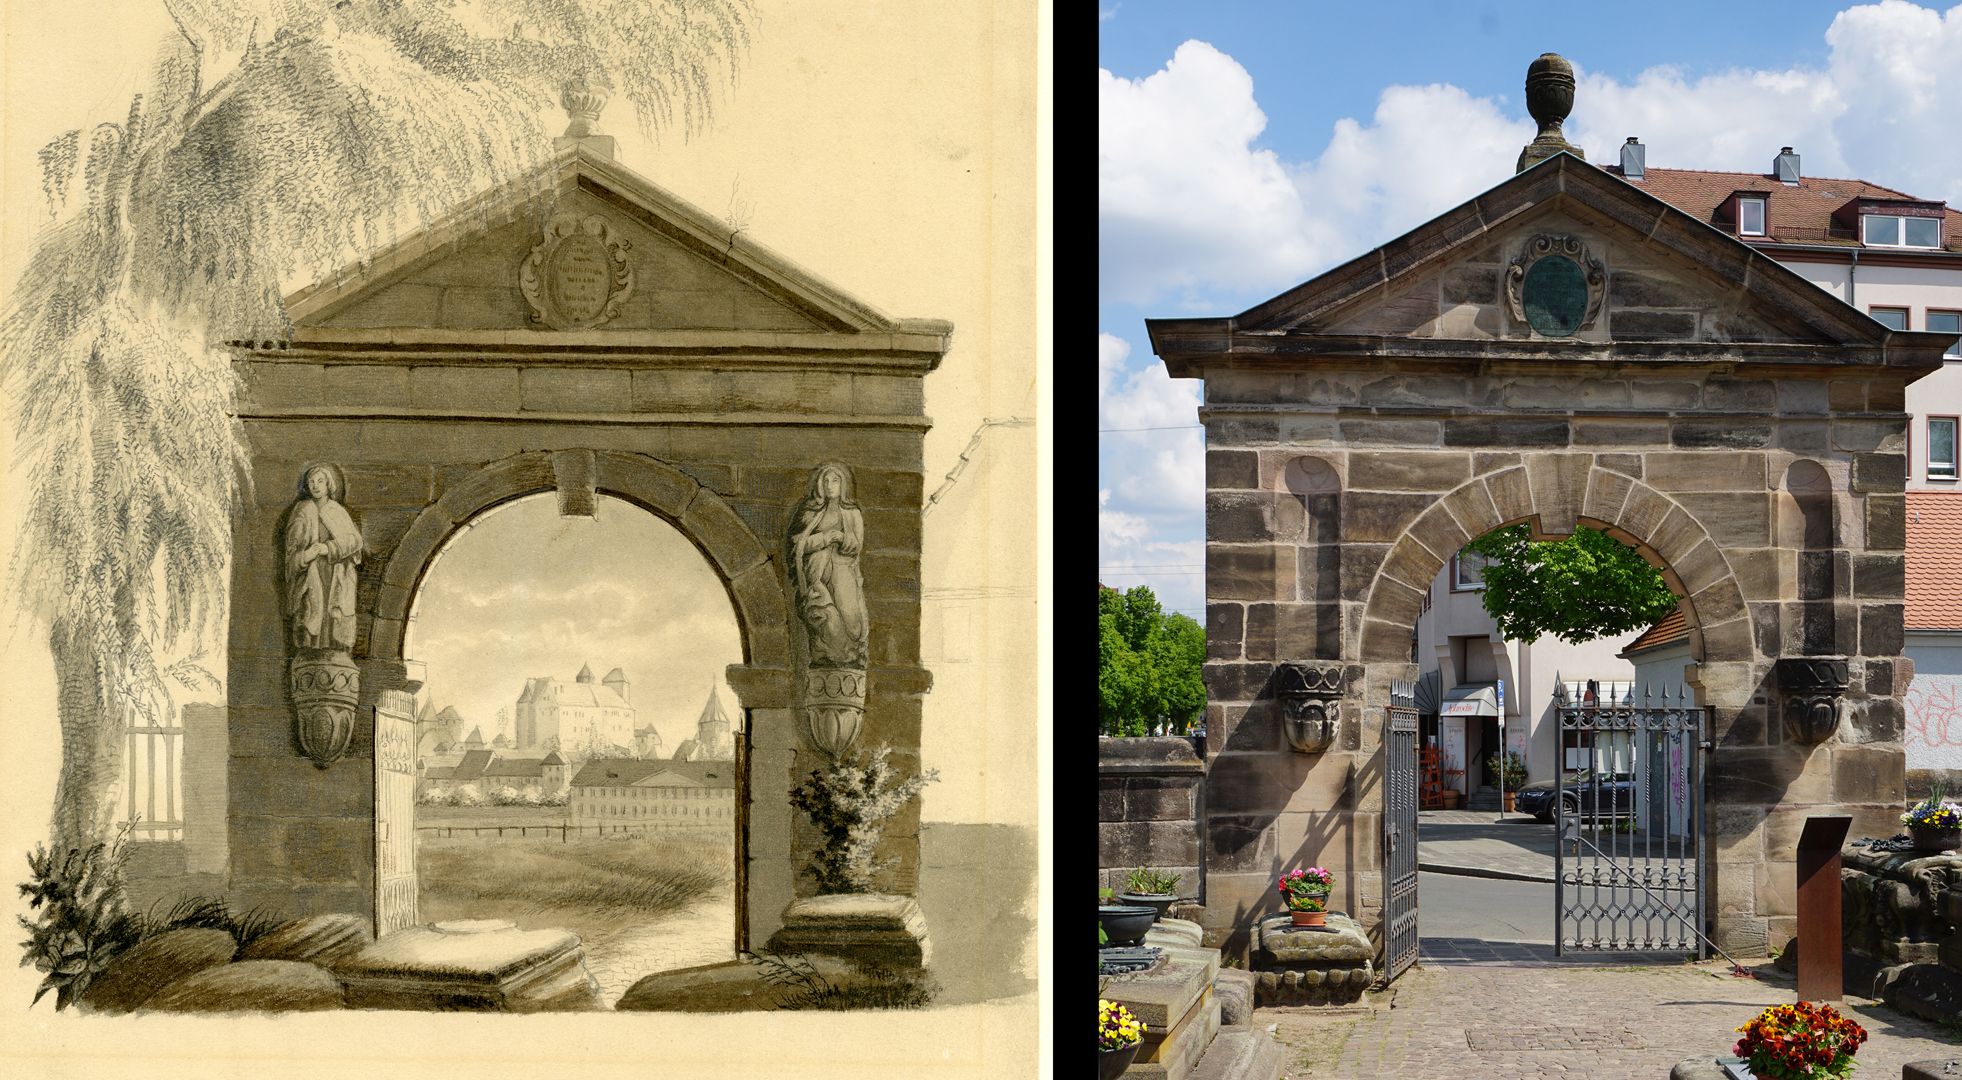 Entrance portal at the Johannis cemetery Comparison picture with today's state